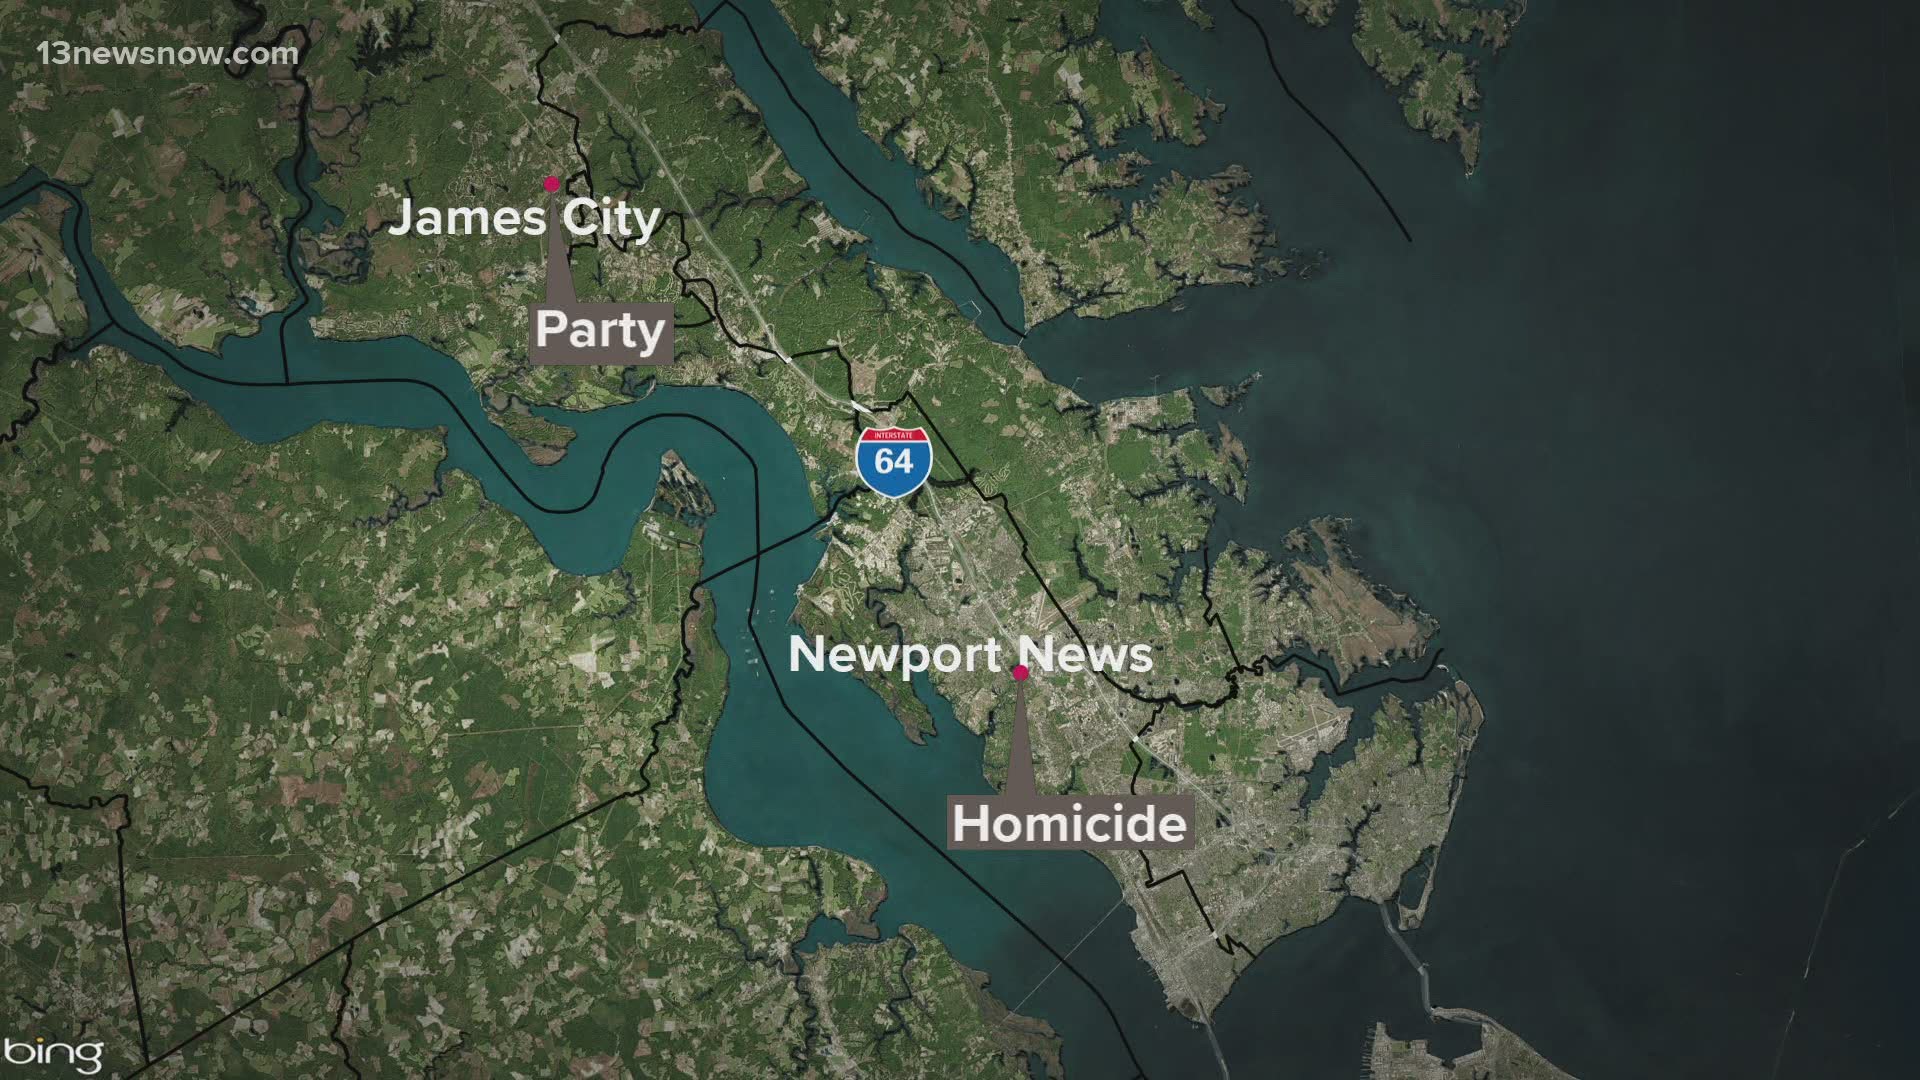 Police in Newport News and James City County are working together on a shooting investigation.